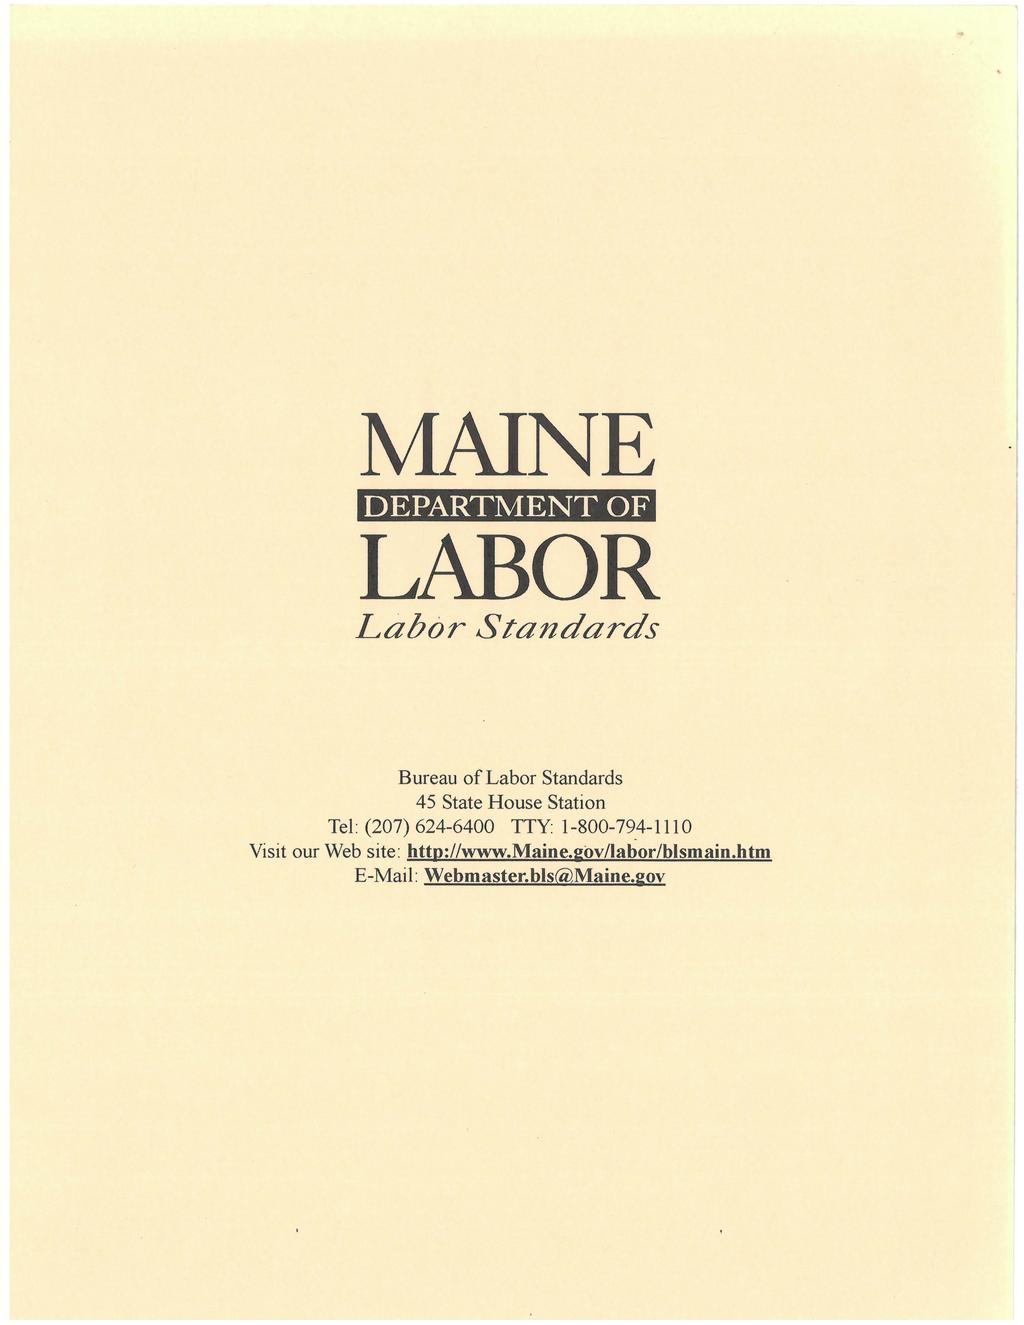 MAINE DEPARTMENT OF LABOR Labor Standards Bureau of Labor Standards 45 State House Station Tel: (207) 624-6400